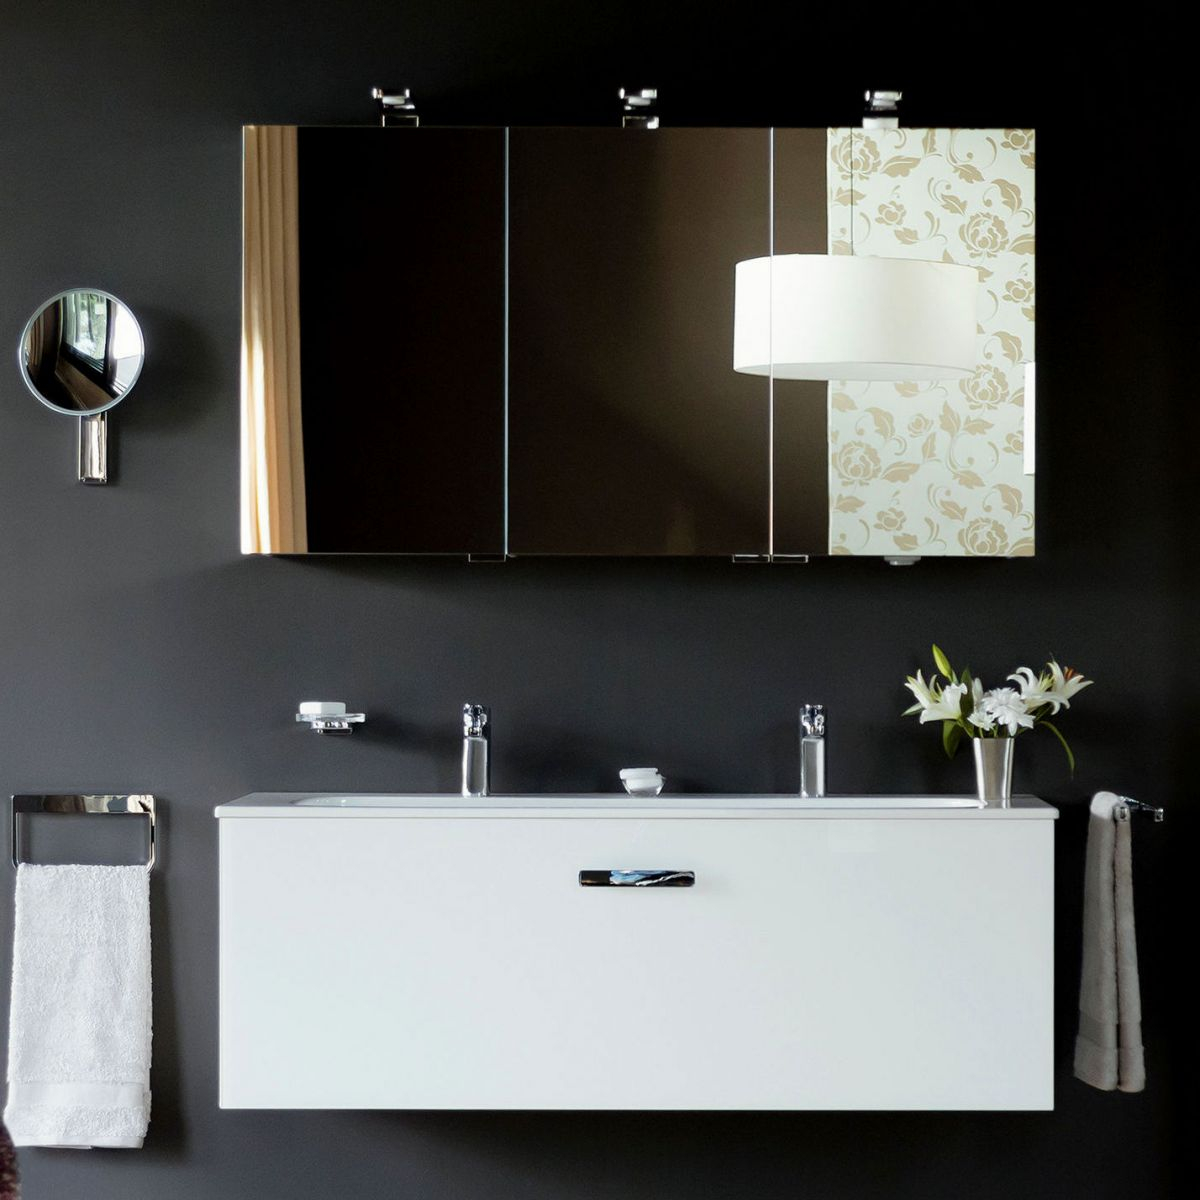 Bathroom Cabinets Also Available With Mirrors Lights Uk Bathrooms regarding size 1200 X 1200